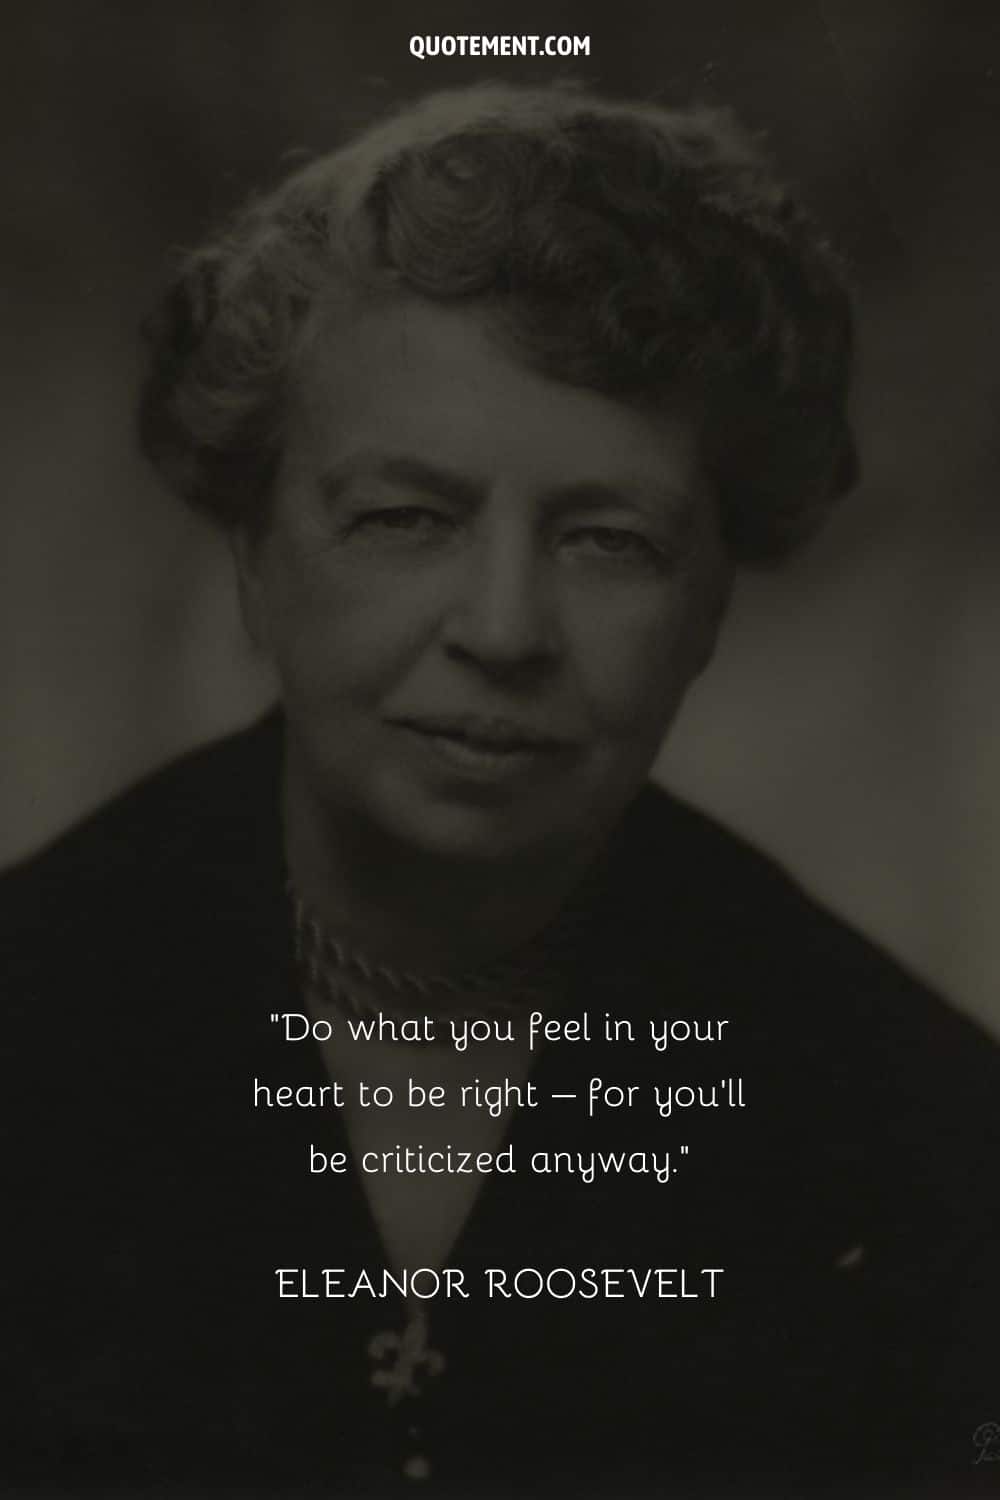 “Do what you feel in your heart to be right – for you’ll be criticized anyway.” — Eleanor Roosevelt